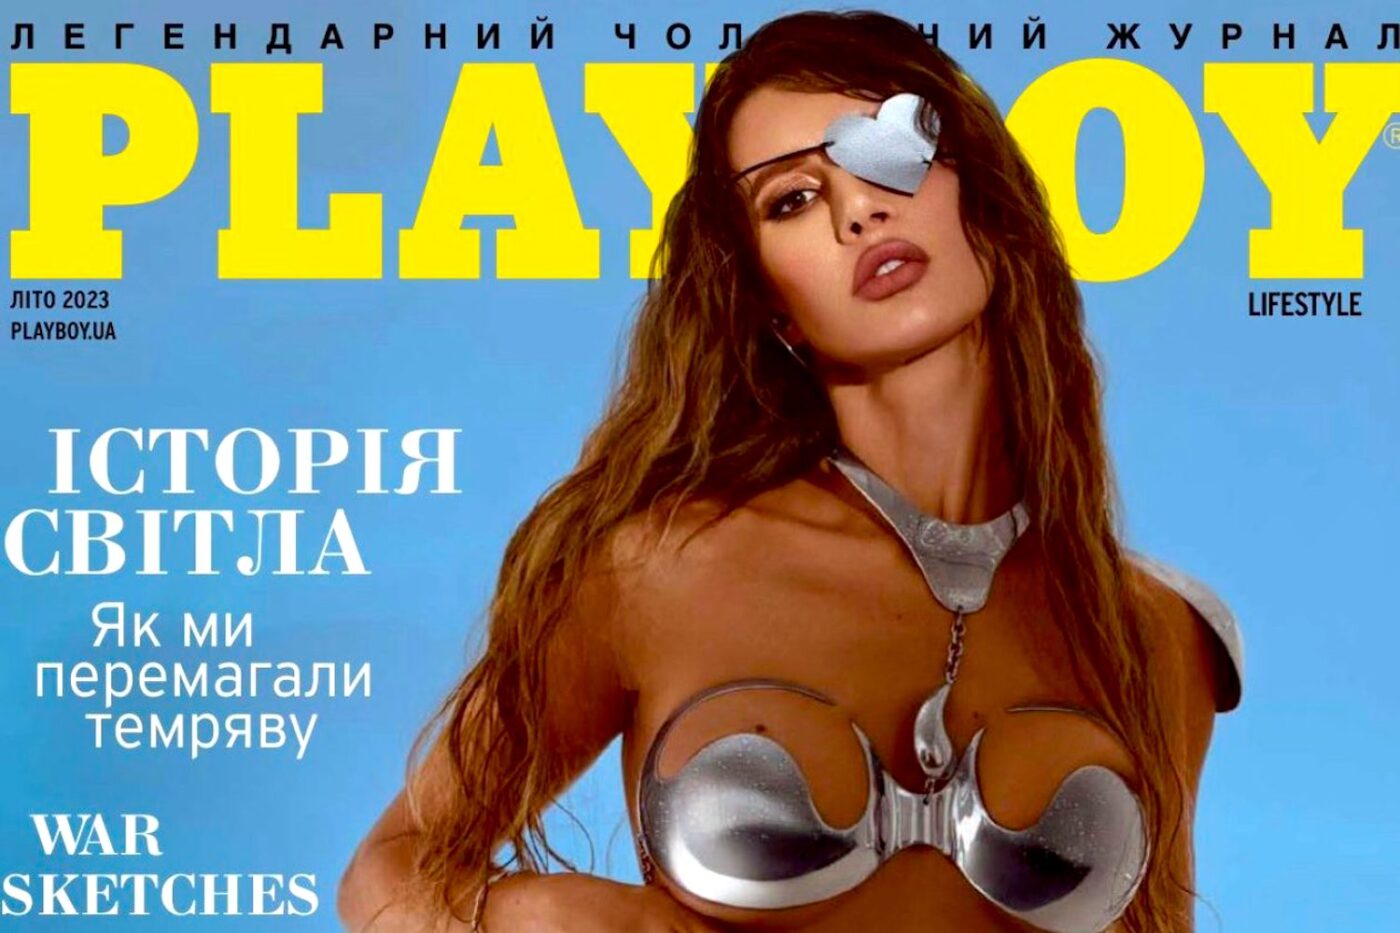 One-Eyed Ukrainian Who Survived Russian Assassination Becomes Playboy Cover Star